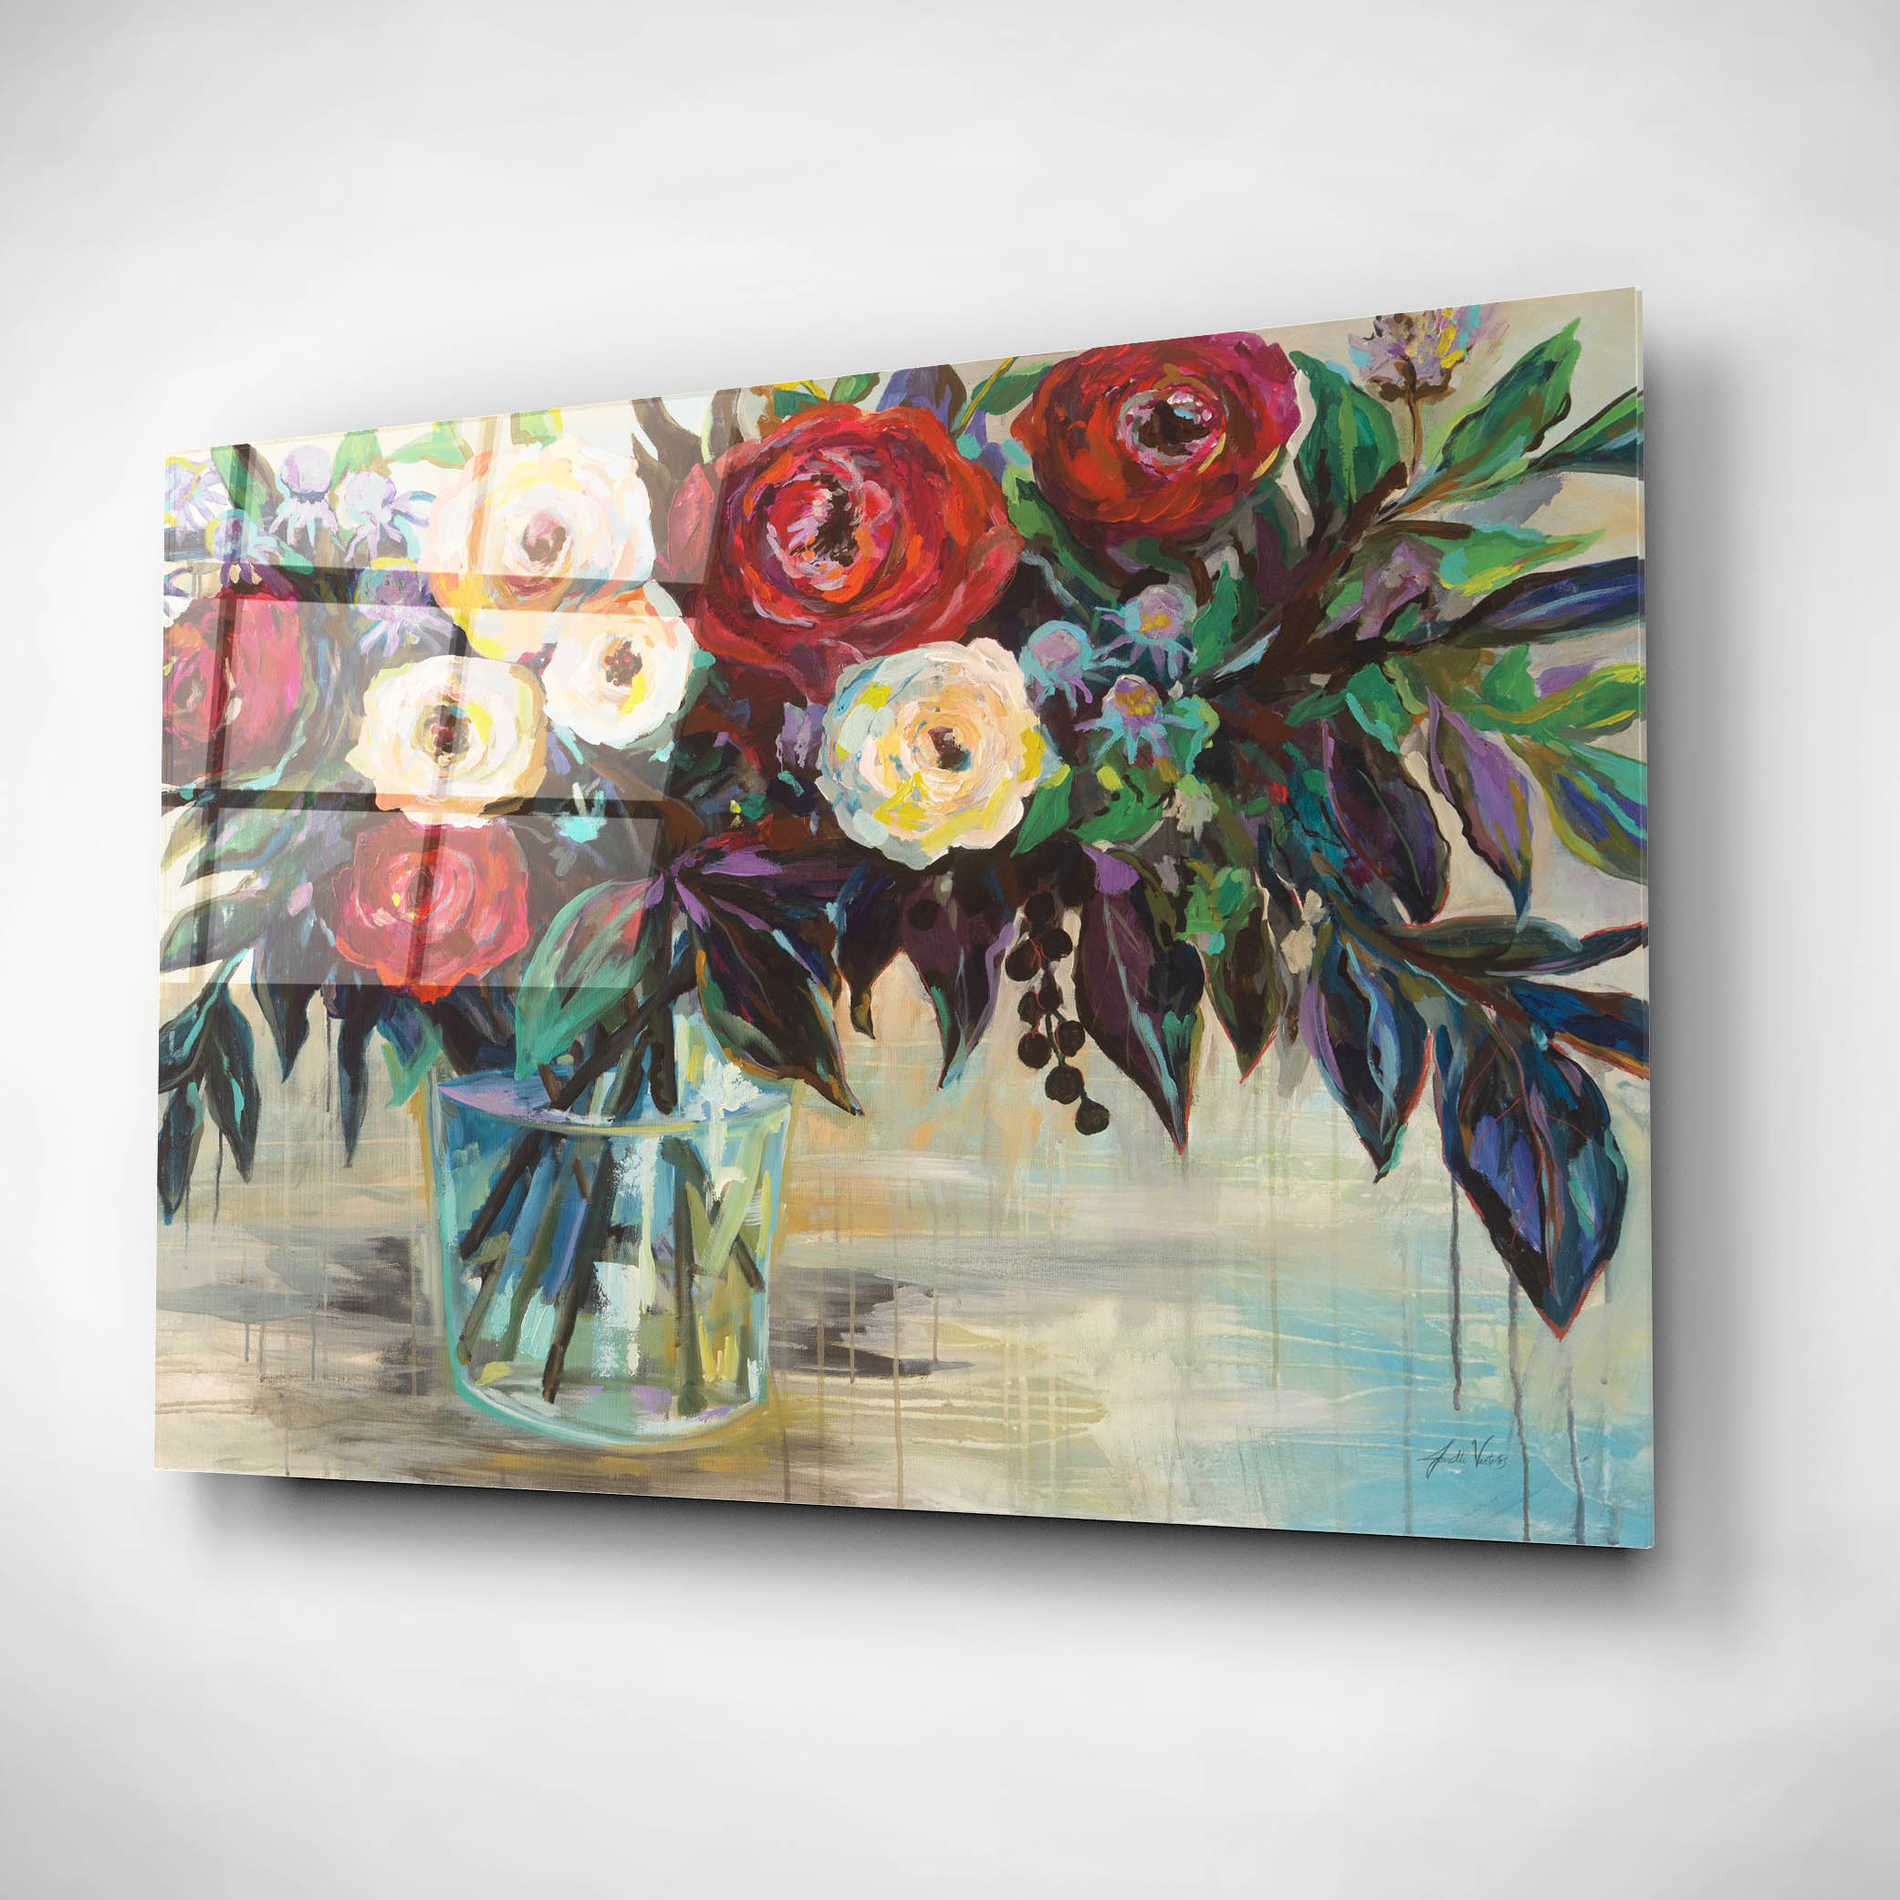 Epic Art 'Winter Floral Crop' by Jeanette Vertentes, Acrylic Glass Wall Art,24x16